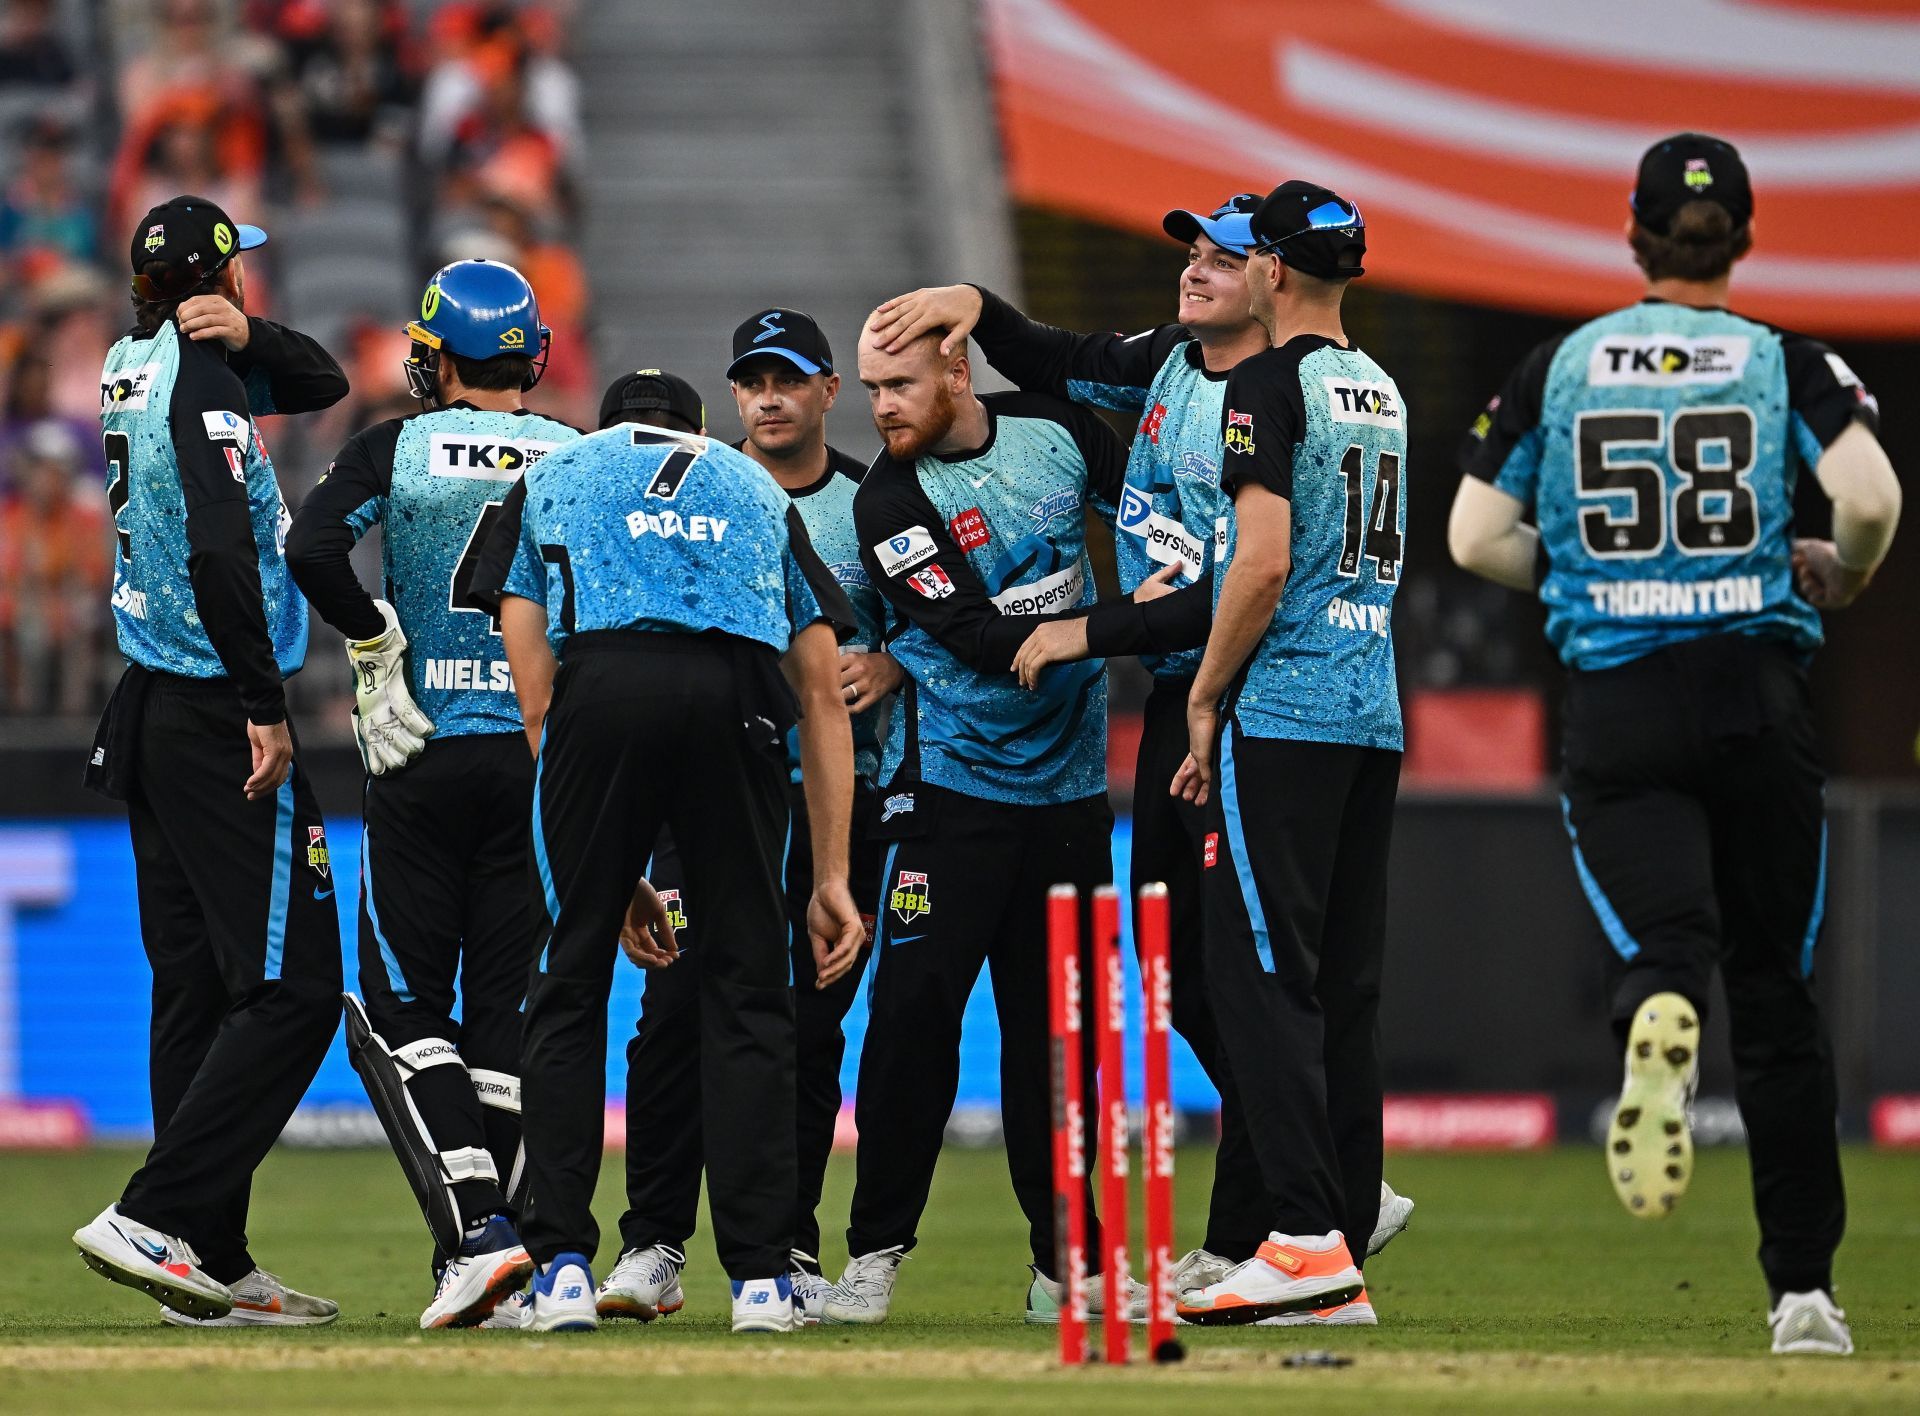 BBL - The Knockout: Perth Scorchers v Adelaide Strikers